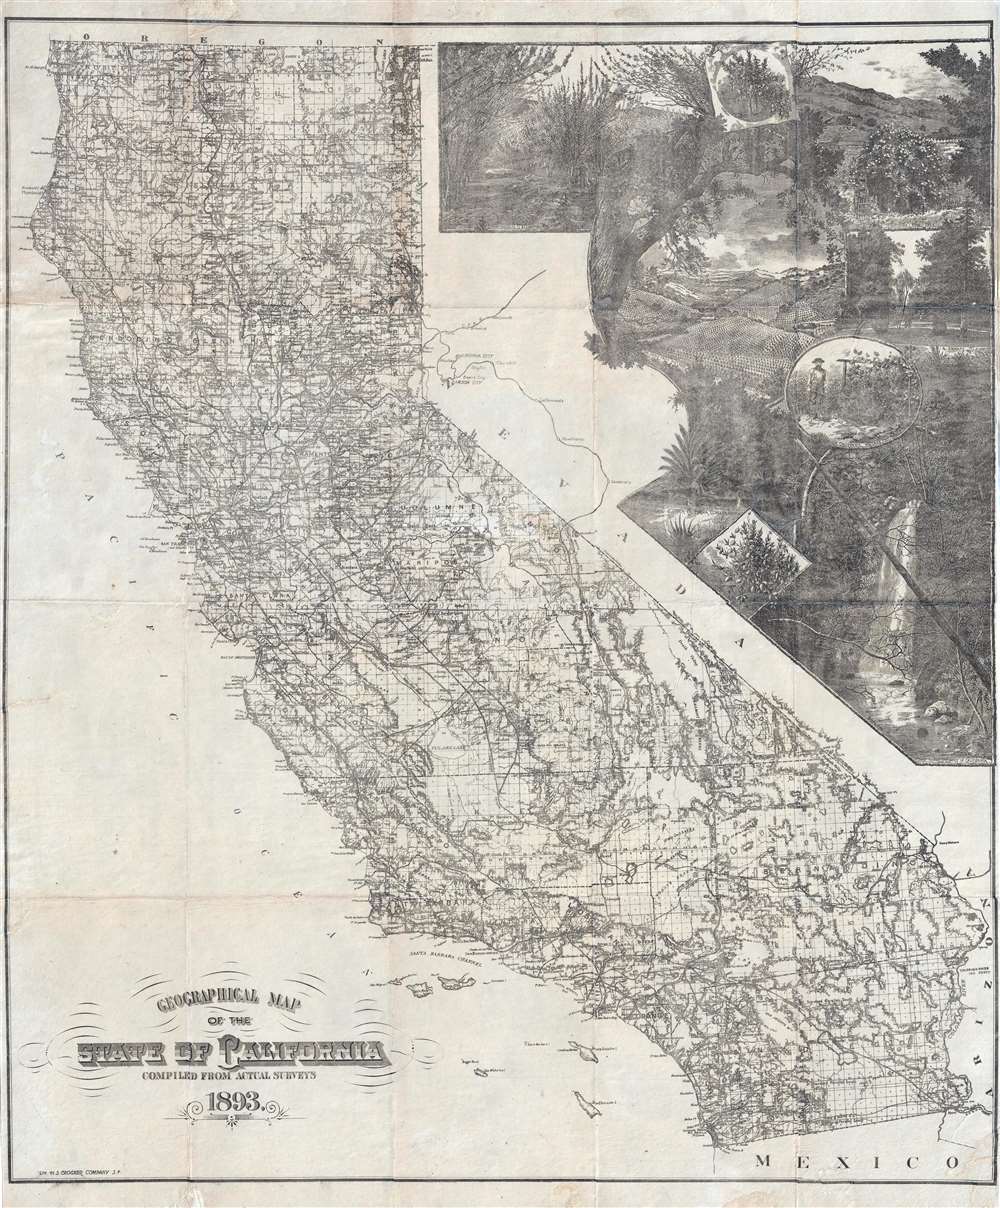 Geographical Map of the State of California Compiled from Actual Surveys. - Main View